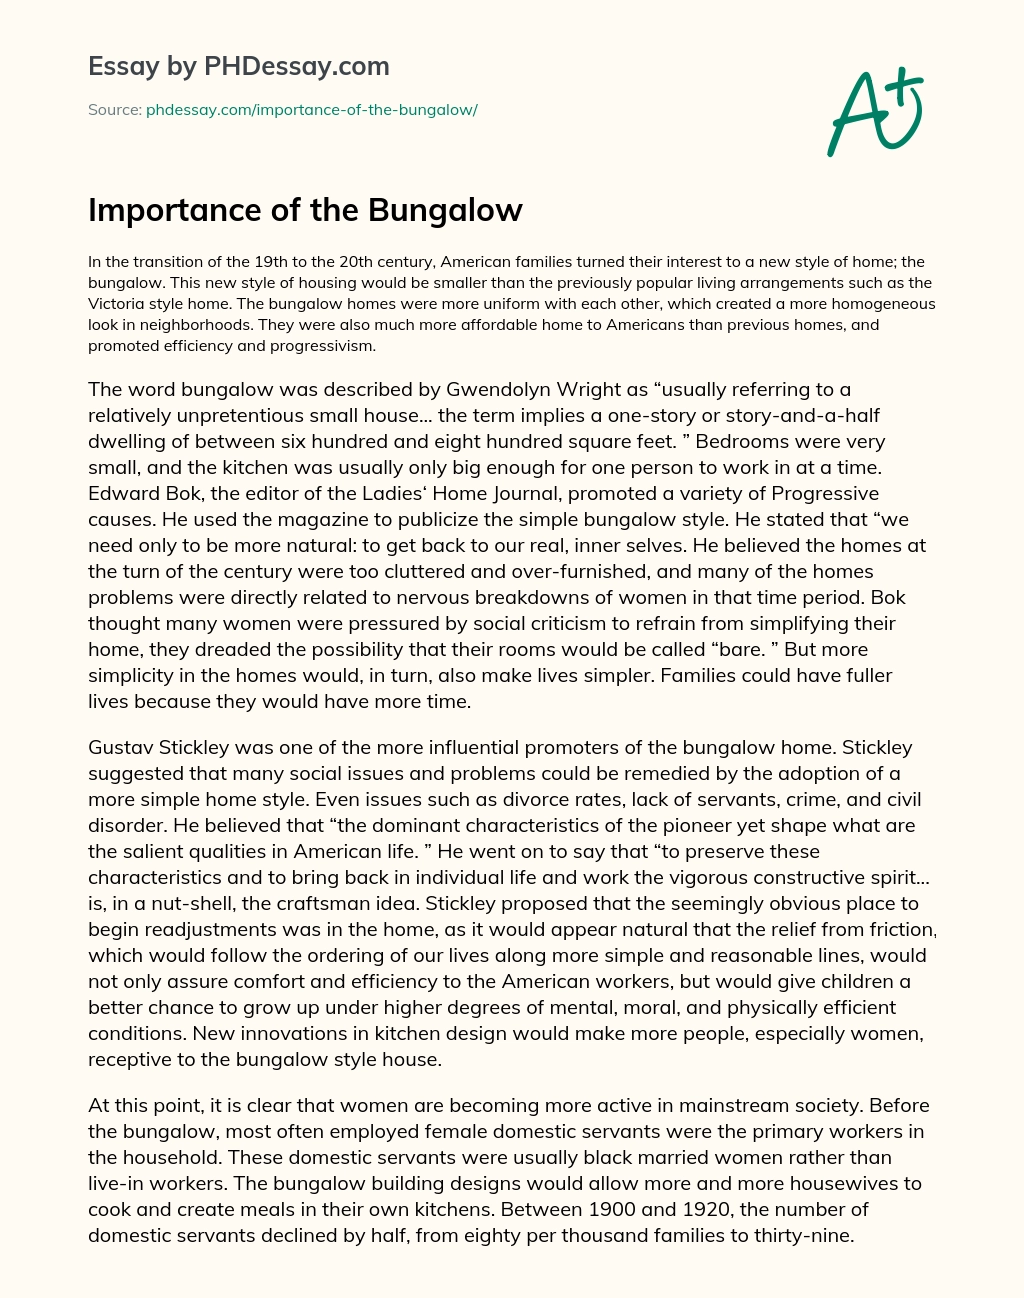 Importance of the Bungalow essay